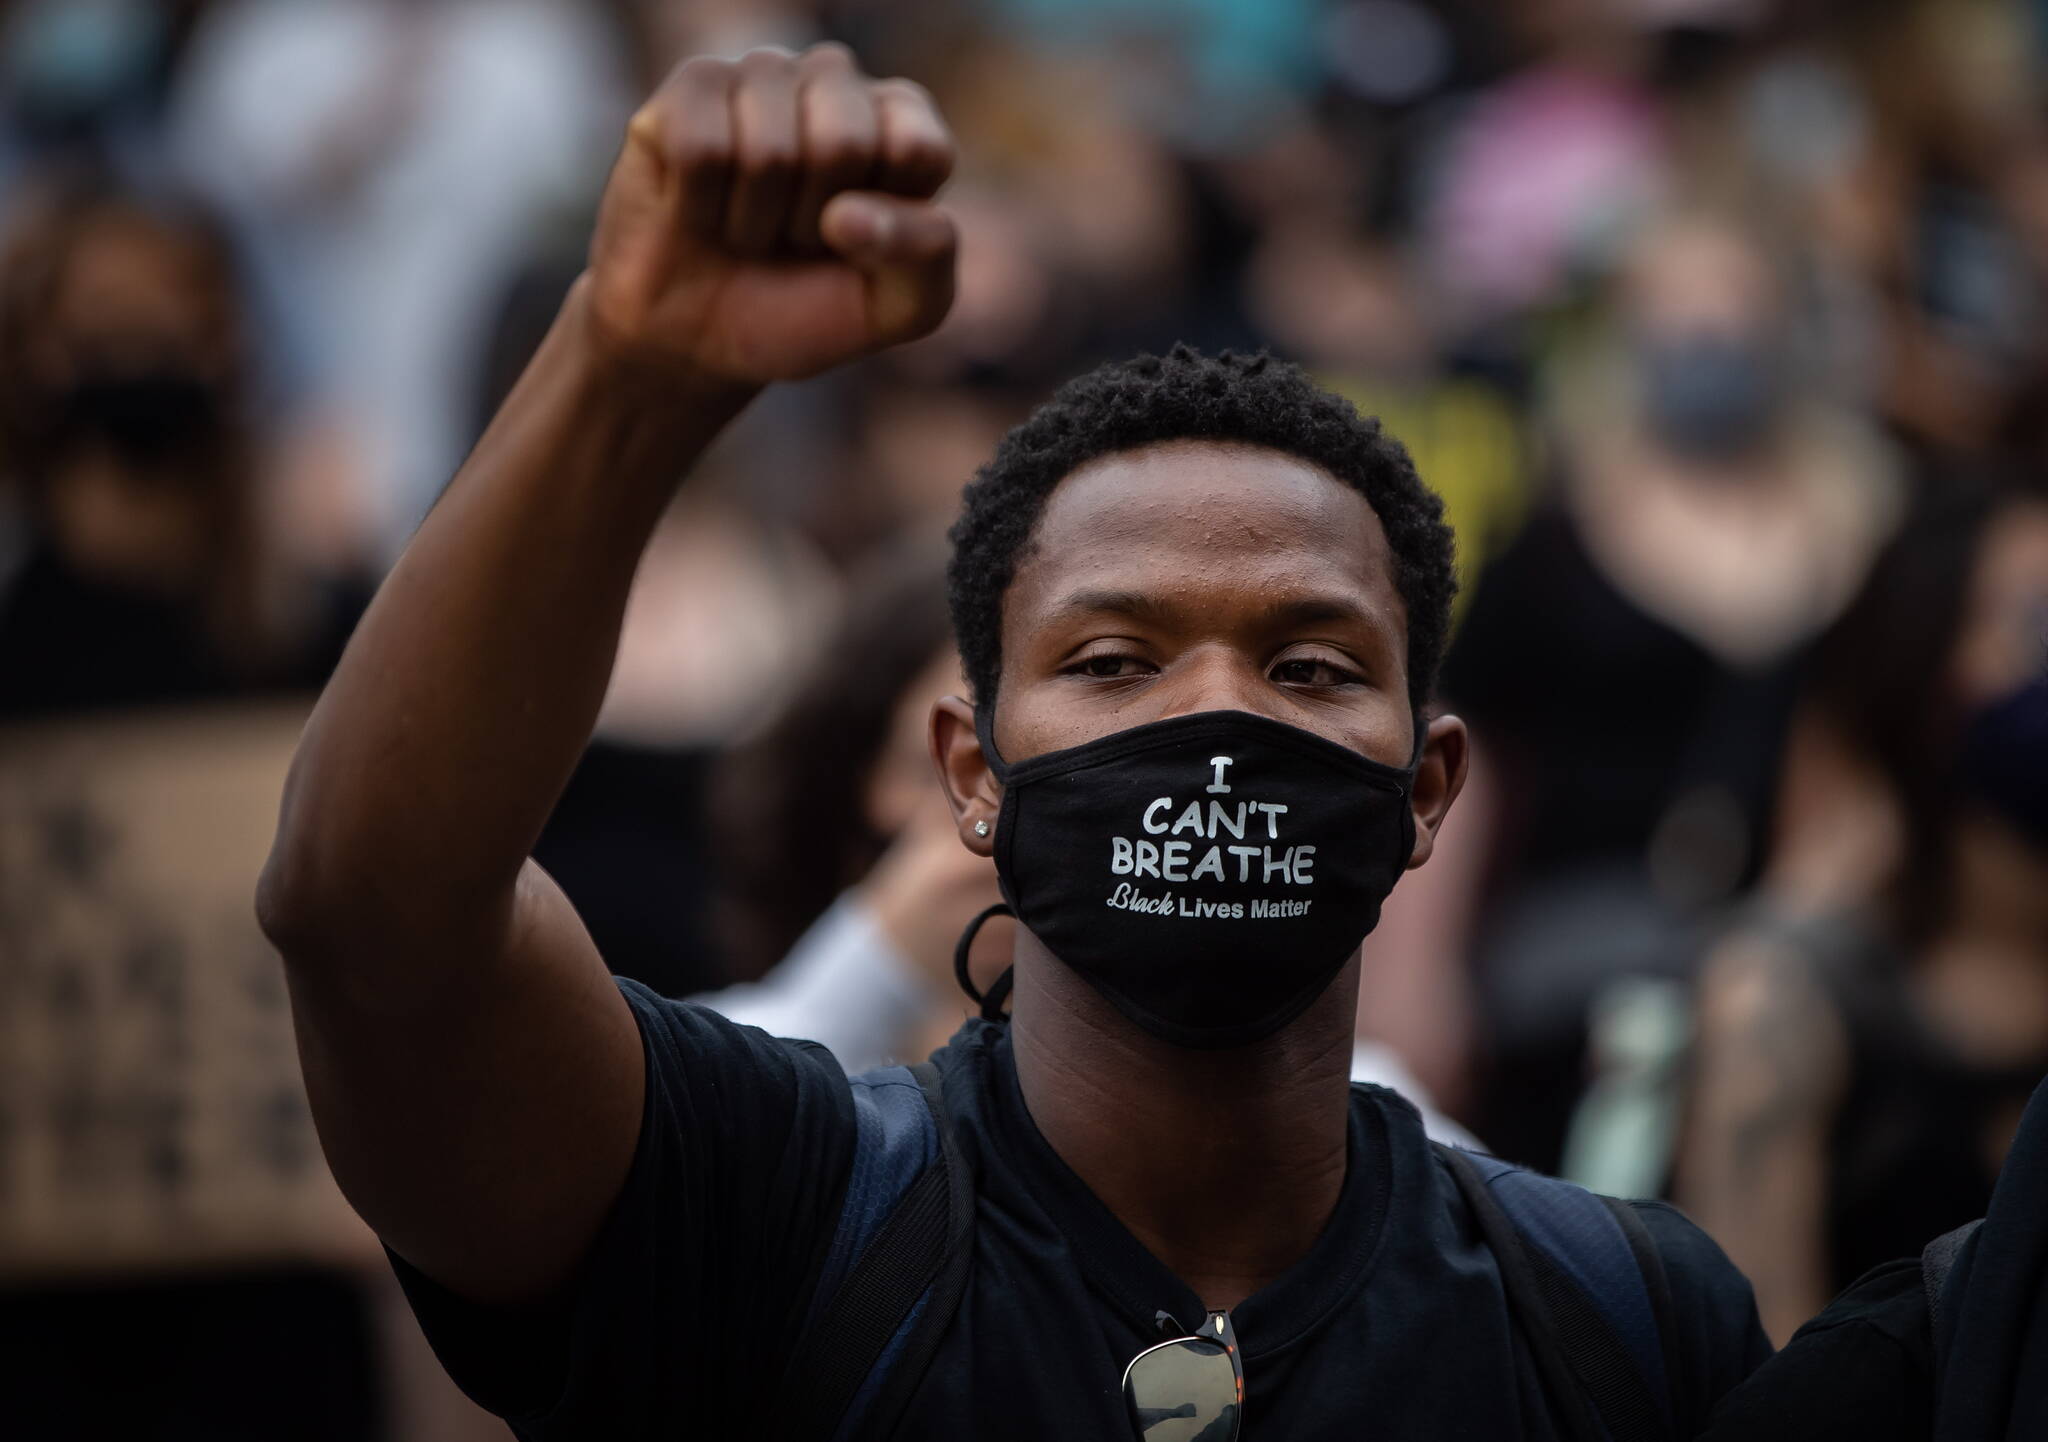 A man wears a face mask that says “I Can’t Breathe” in Vancouver on June 19, 2020 during the height of the Black Lives Matter protests. B.C. police reforms that began in 2020 have been delayed by the public safety ministry. Photo: Darryl Dyck/The Canadian Press